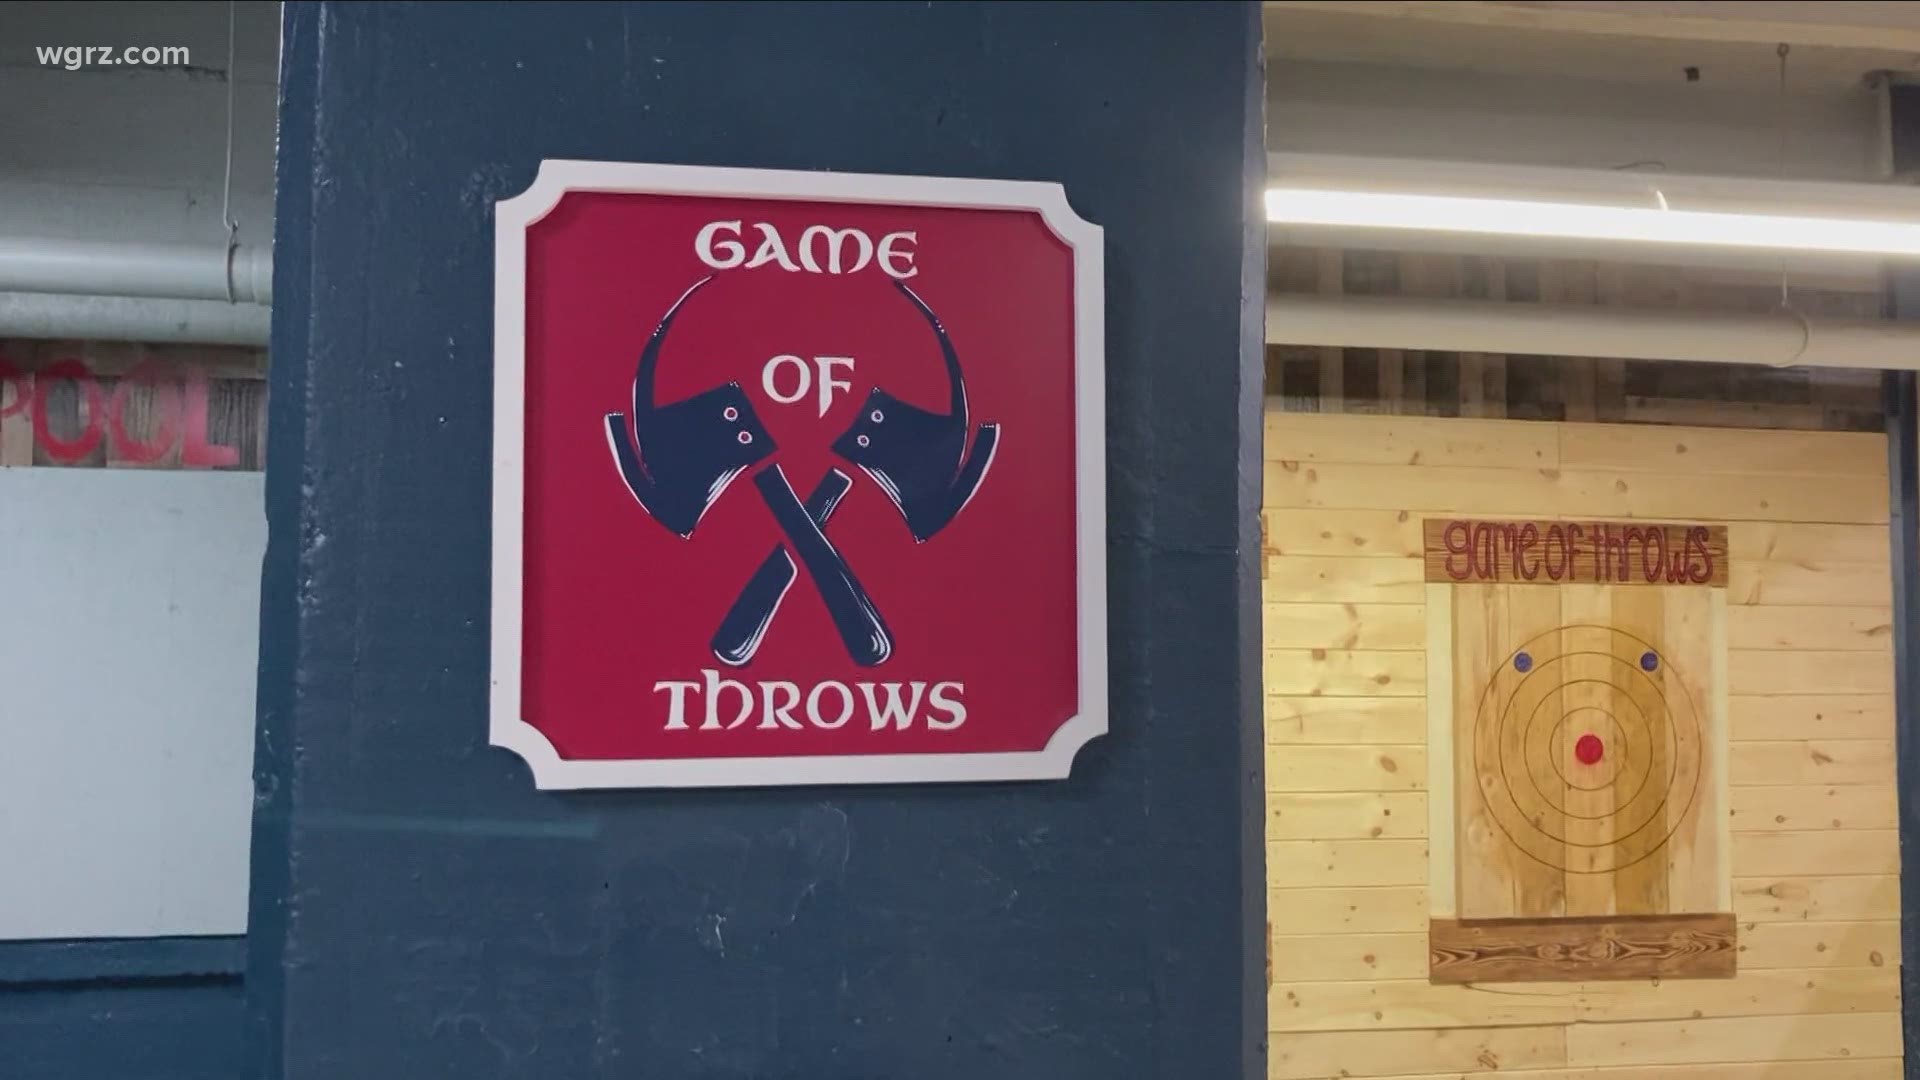 'Game of Throws' opens up in Batavia.